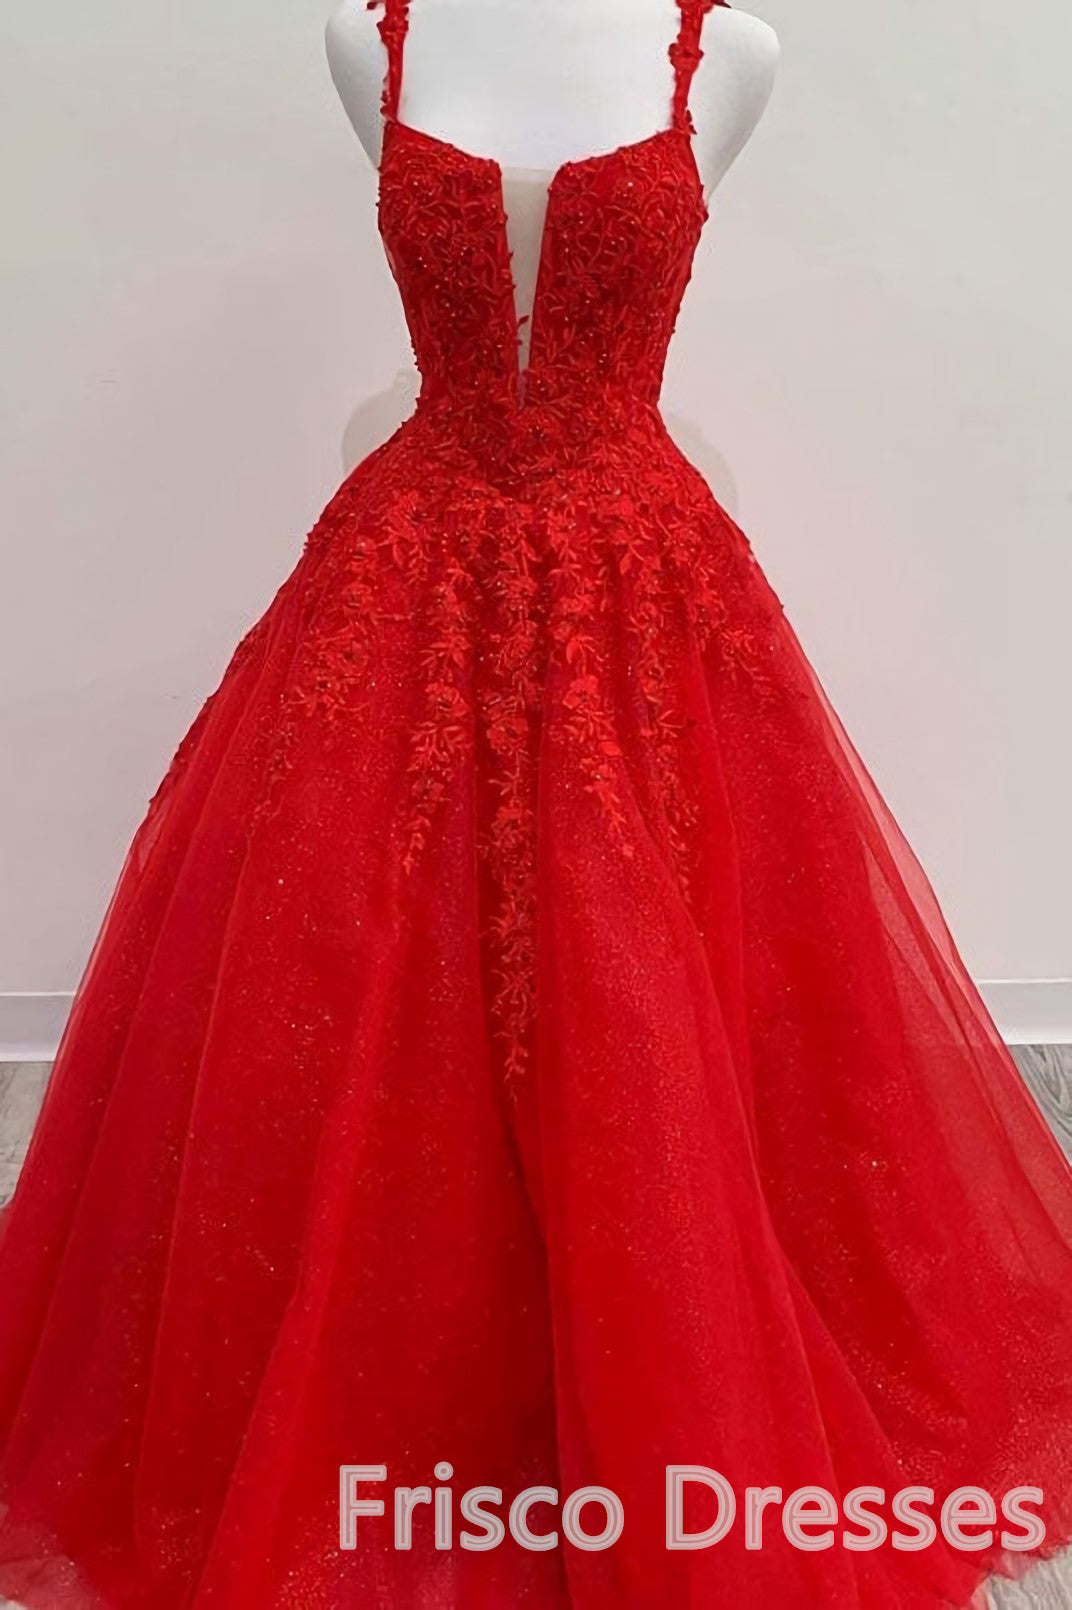 Red Tulle Lace A Line Corset Formal Evening Dresses Appliques Long Corset Prom Dresses outfit, Party Dress In Store